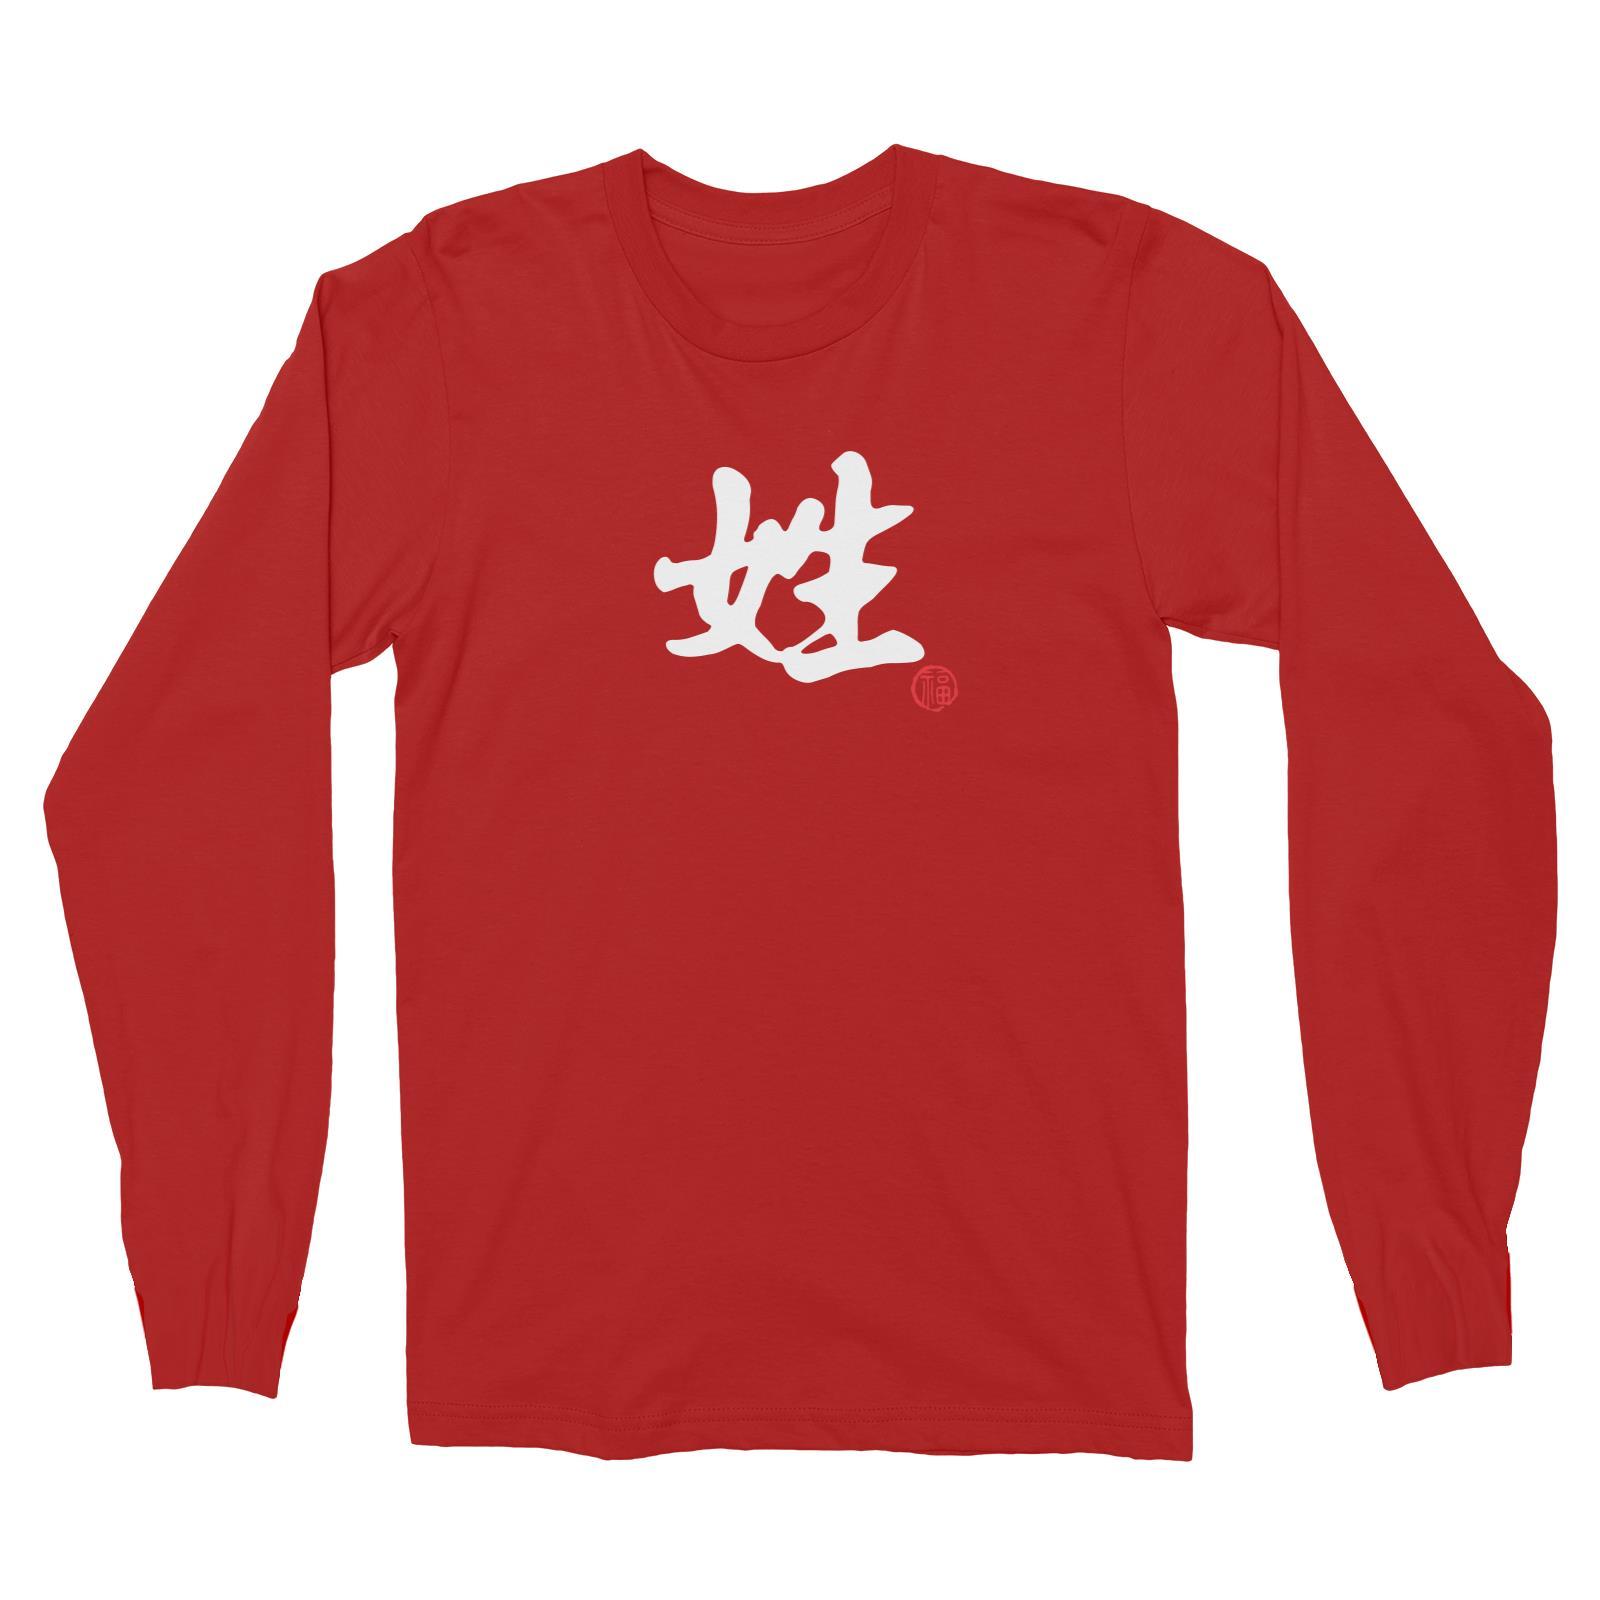 Chinese Surname B&W with Prosperity Seal Long Sleeve Unisex T-Shirt Matching Family Personalizable Designs